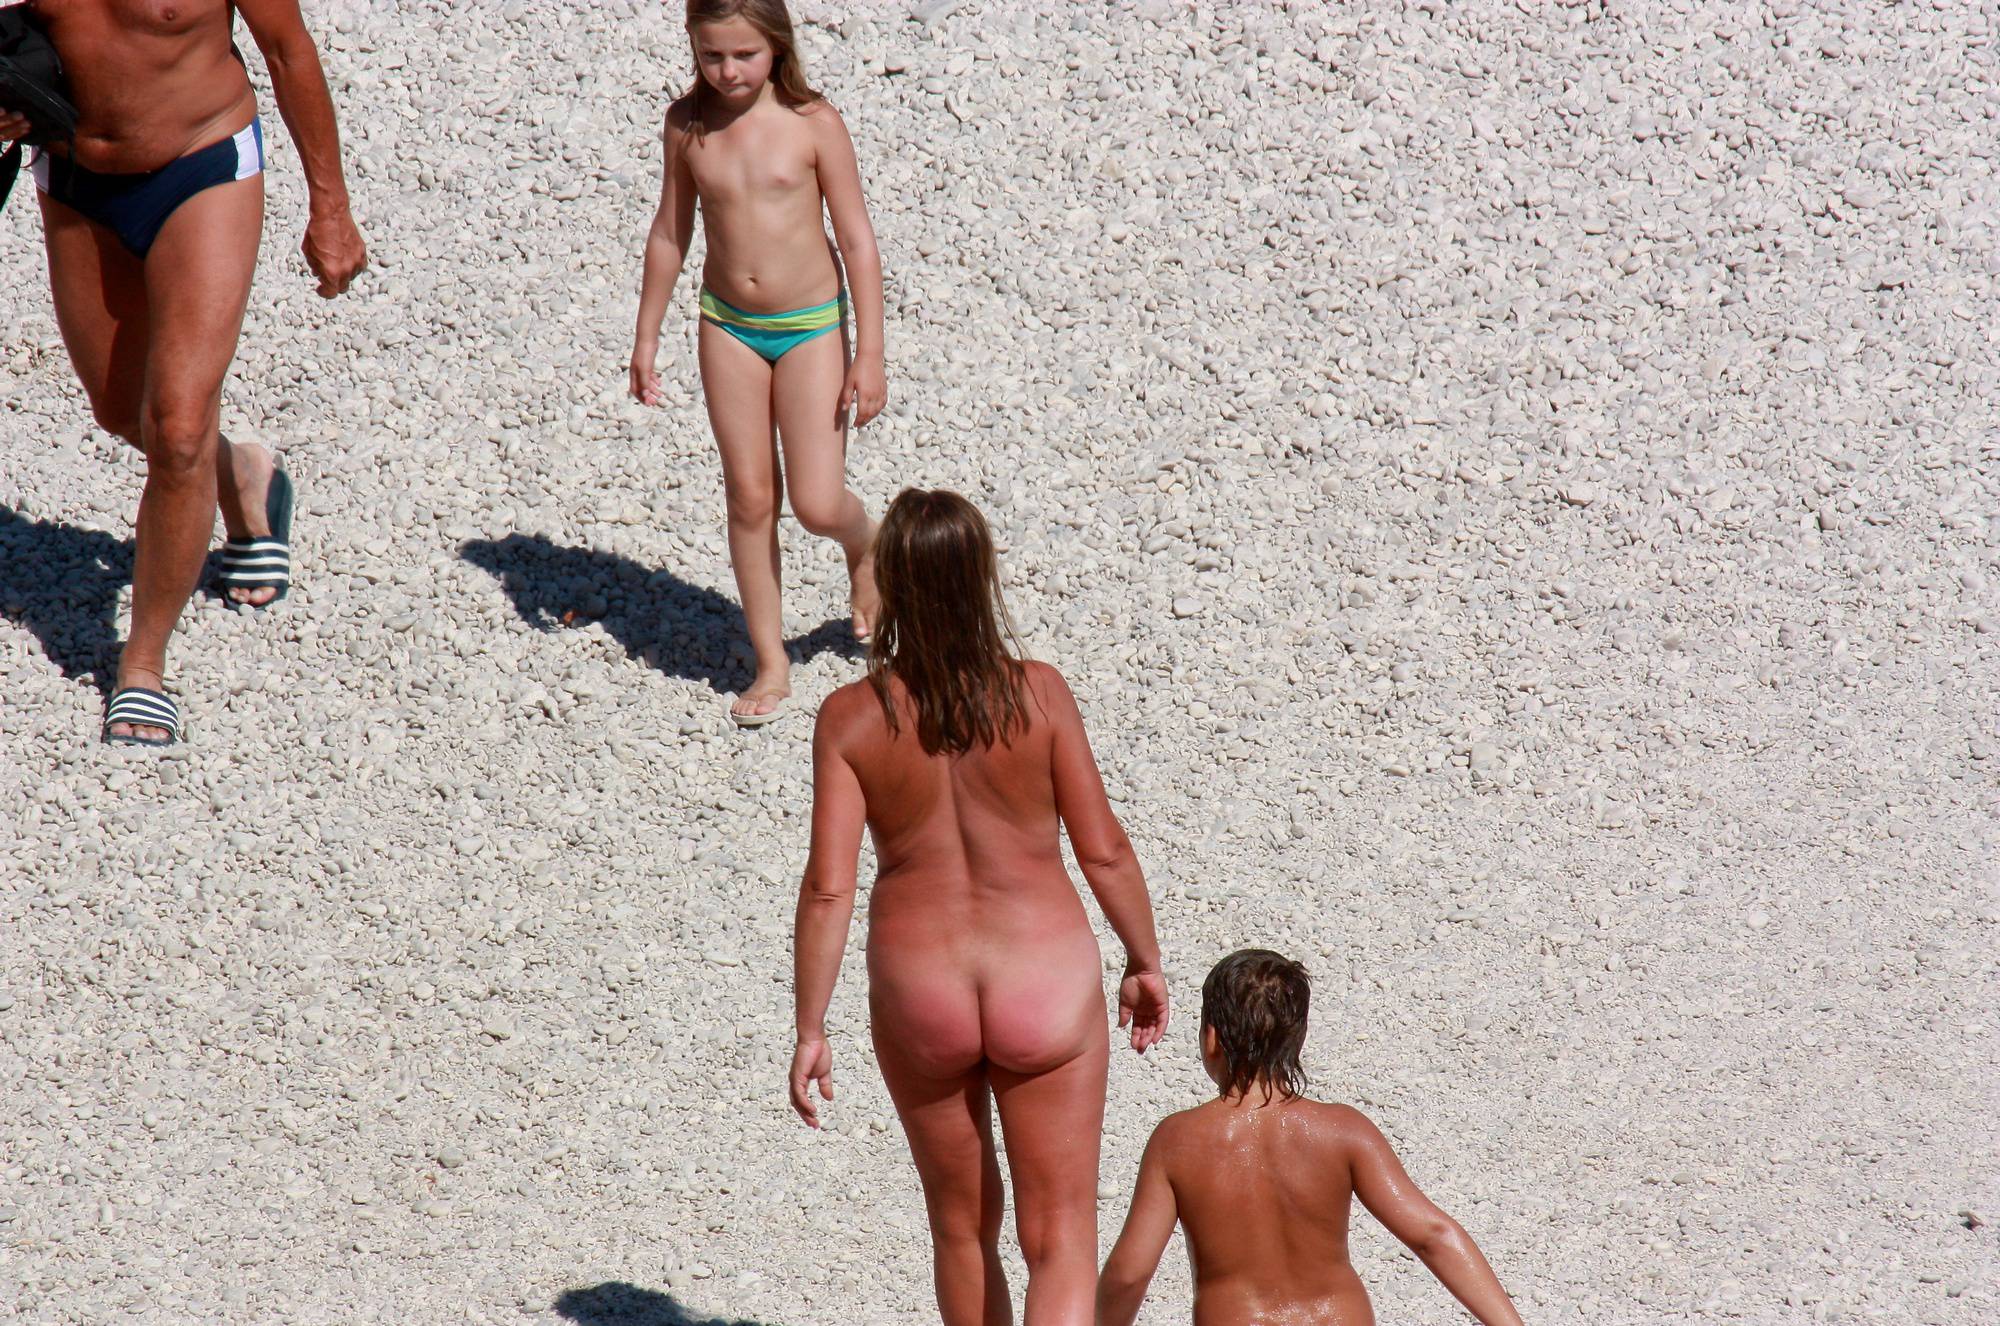 Family Nudist Pictures - Not All Families Go Nude - 2